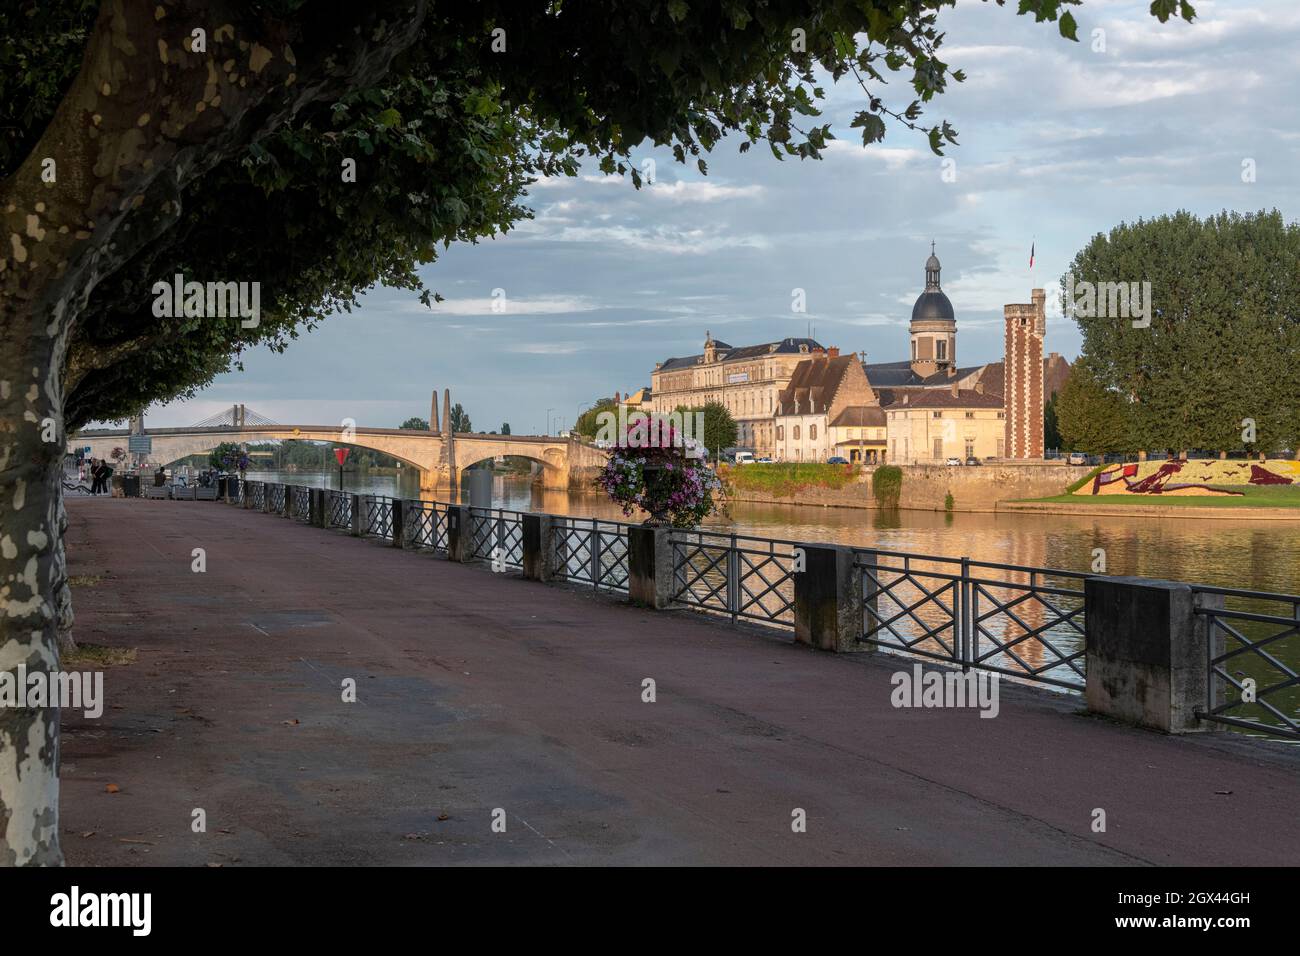 The Banks of the River Saone in Chalon-sur-Saône, Eastern France. Stock Photo